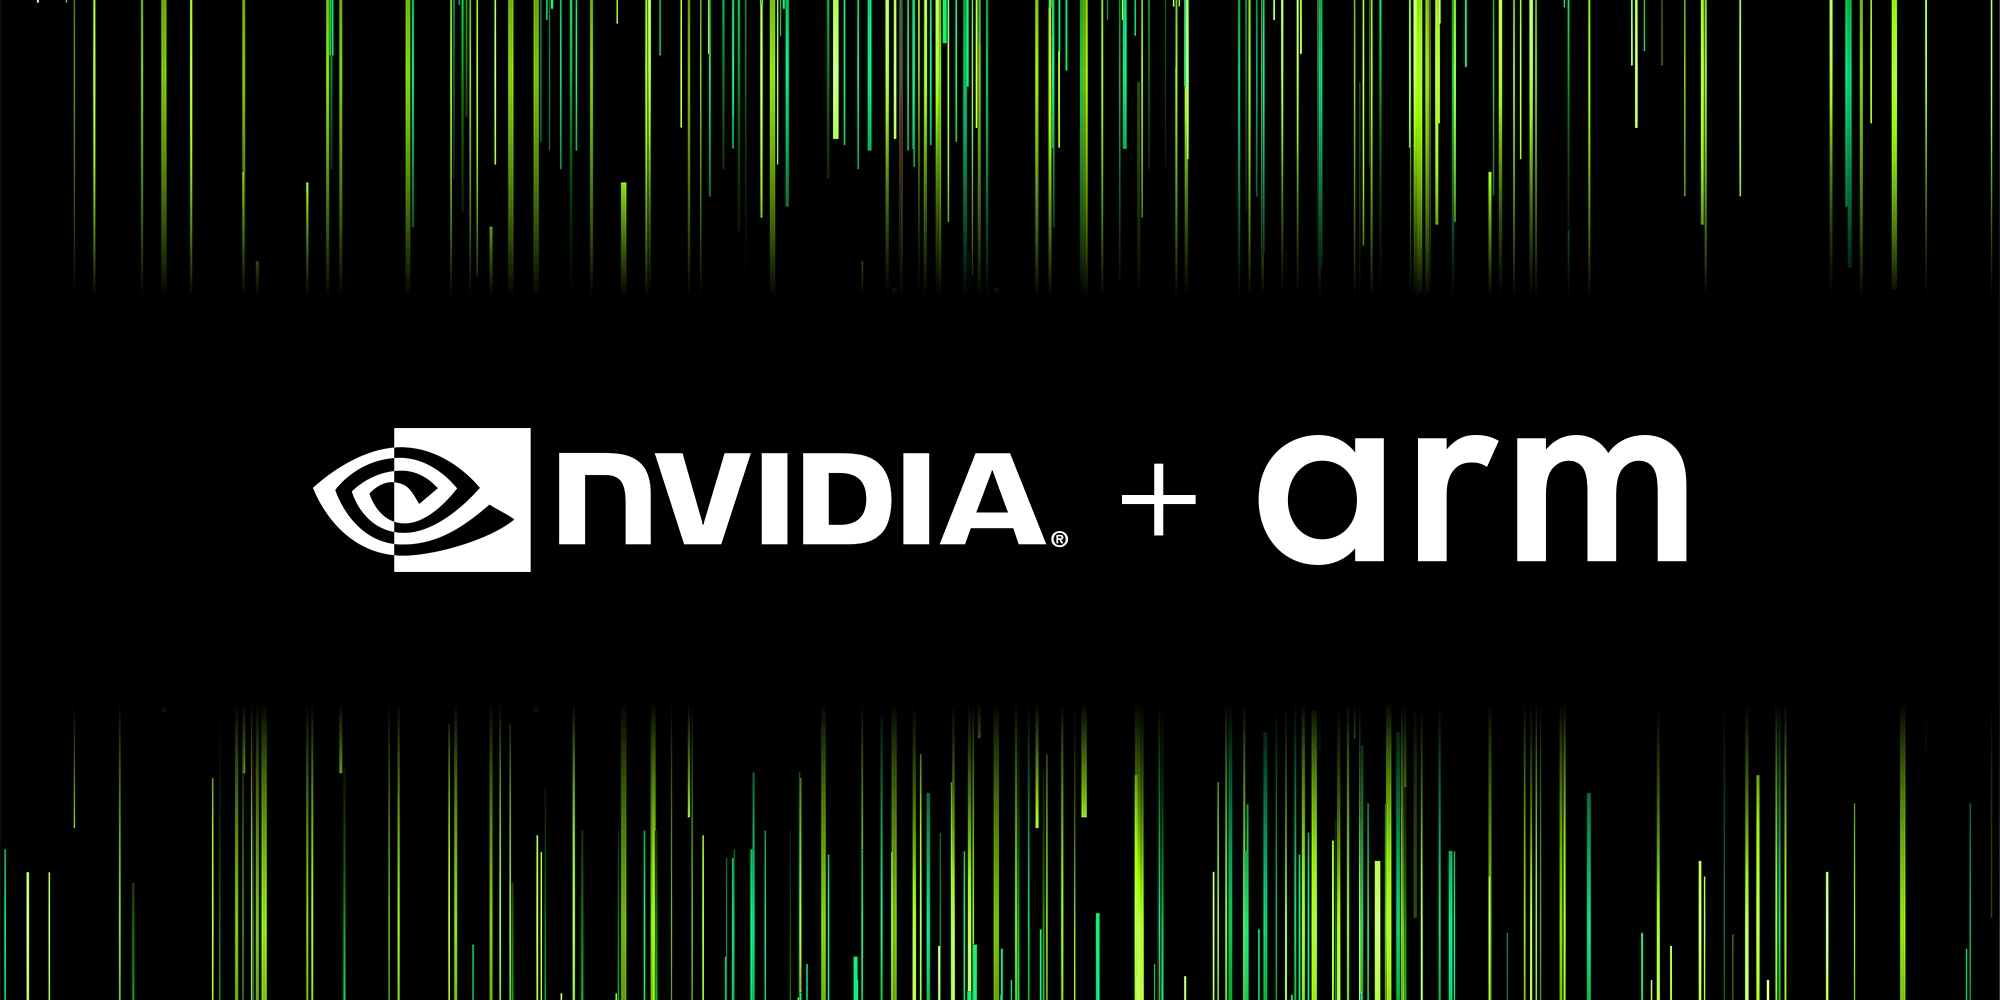 Good Intel and Qualcomm: Nvidia likely dropping $40B bid to acquire Arm - 9to5Mac